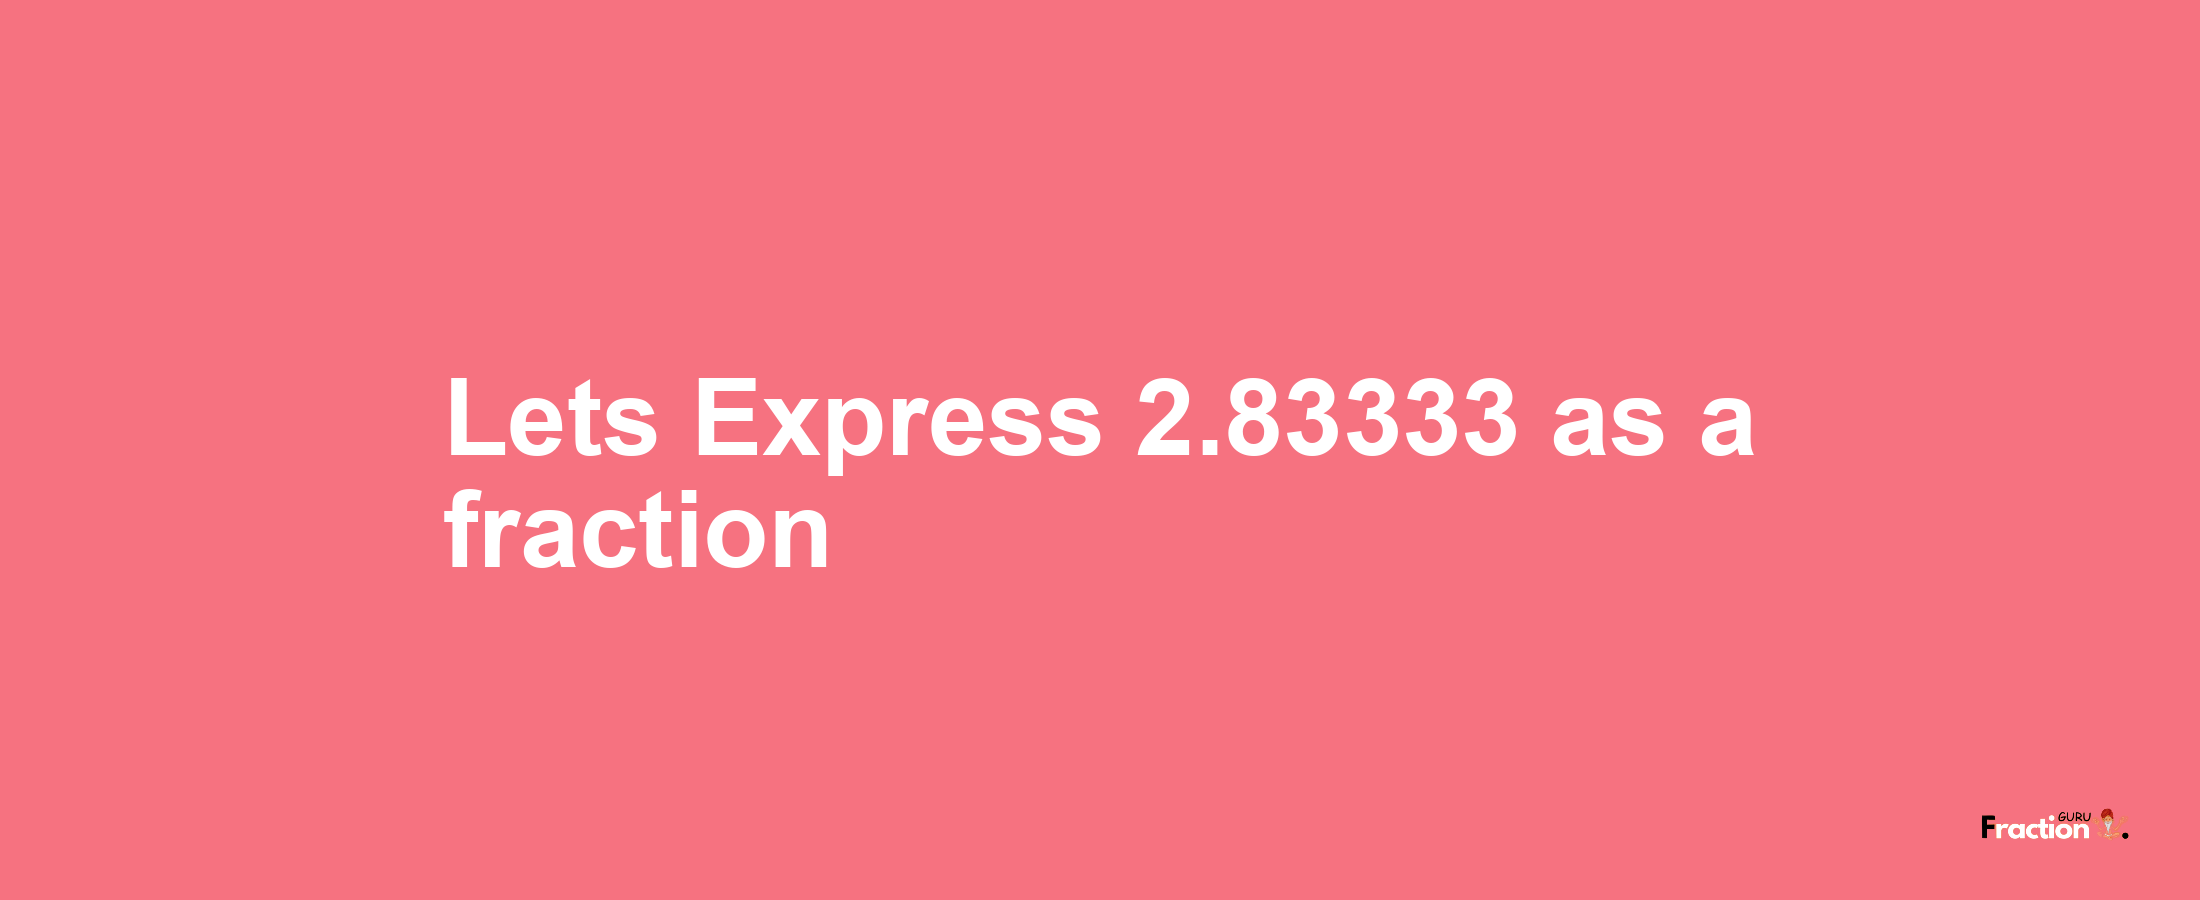 Lets Express 2.83333 as afraction